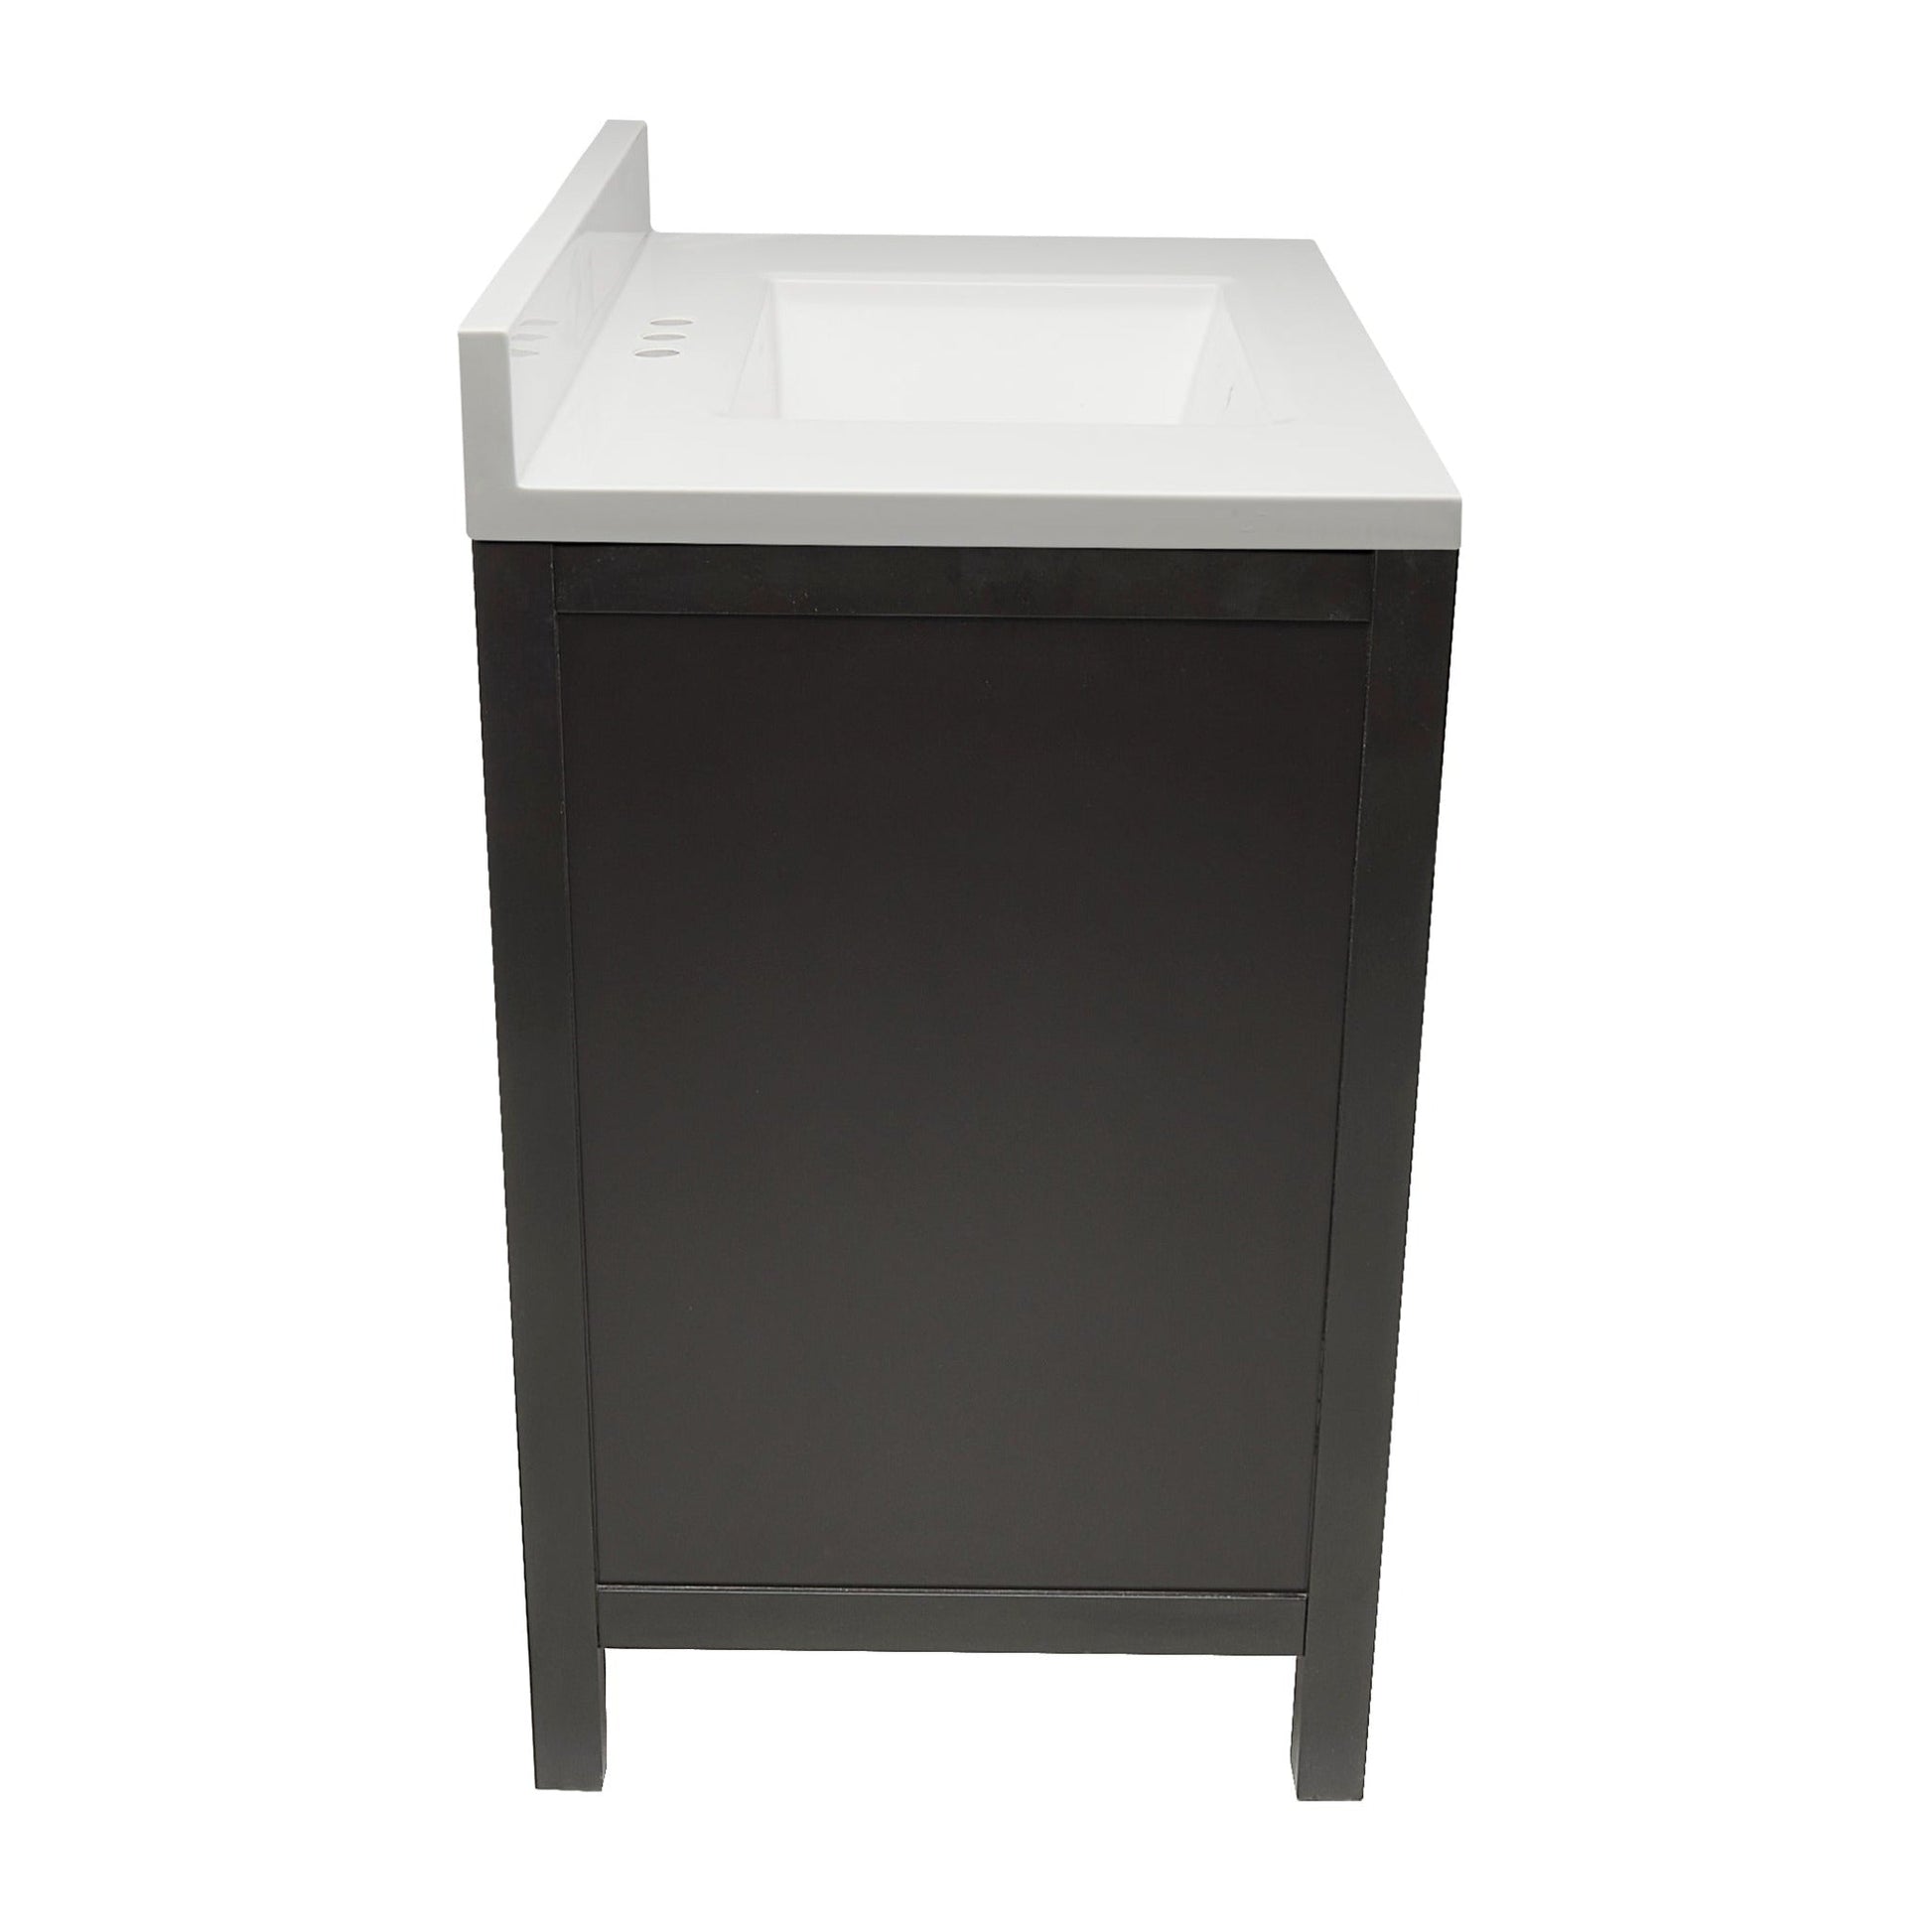 Ella’s Bubbles Nevado 31" Espresso Bathroom Vanity With White Cultured Marble Top With White Backsplash and Sink